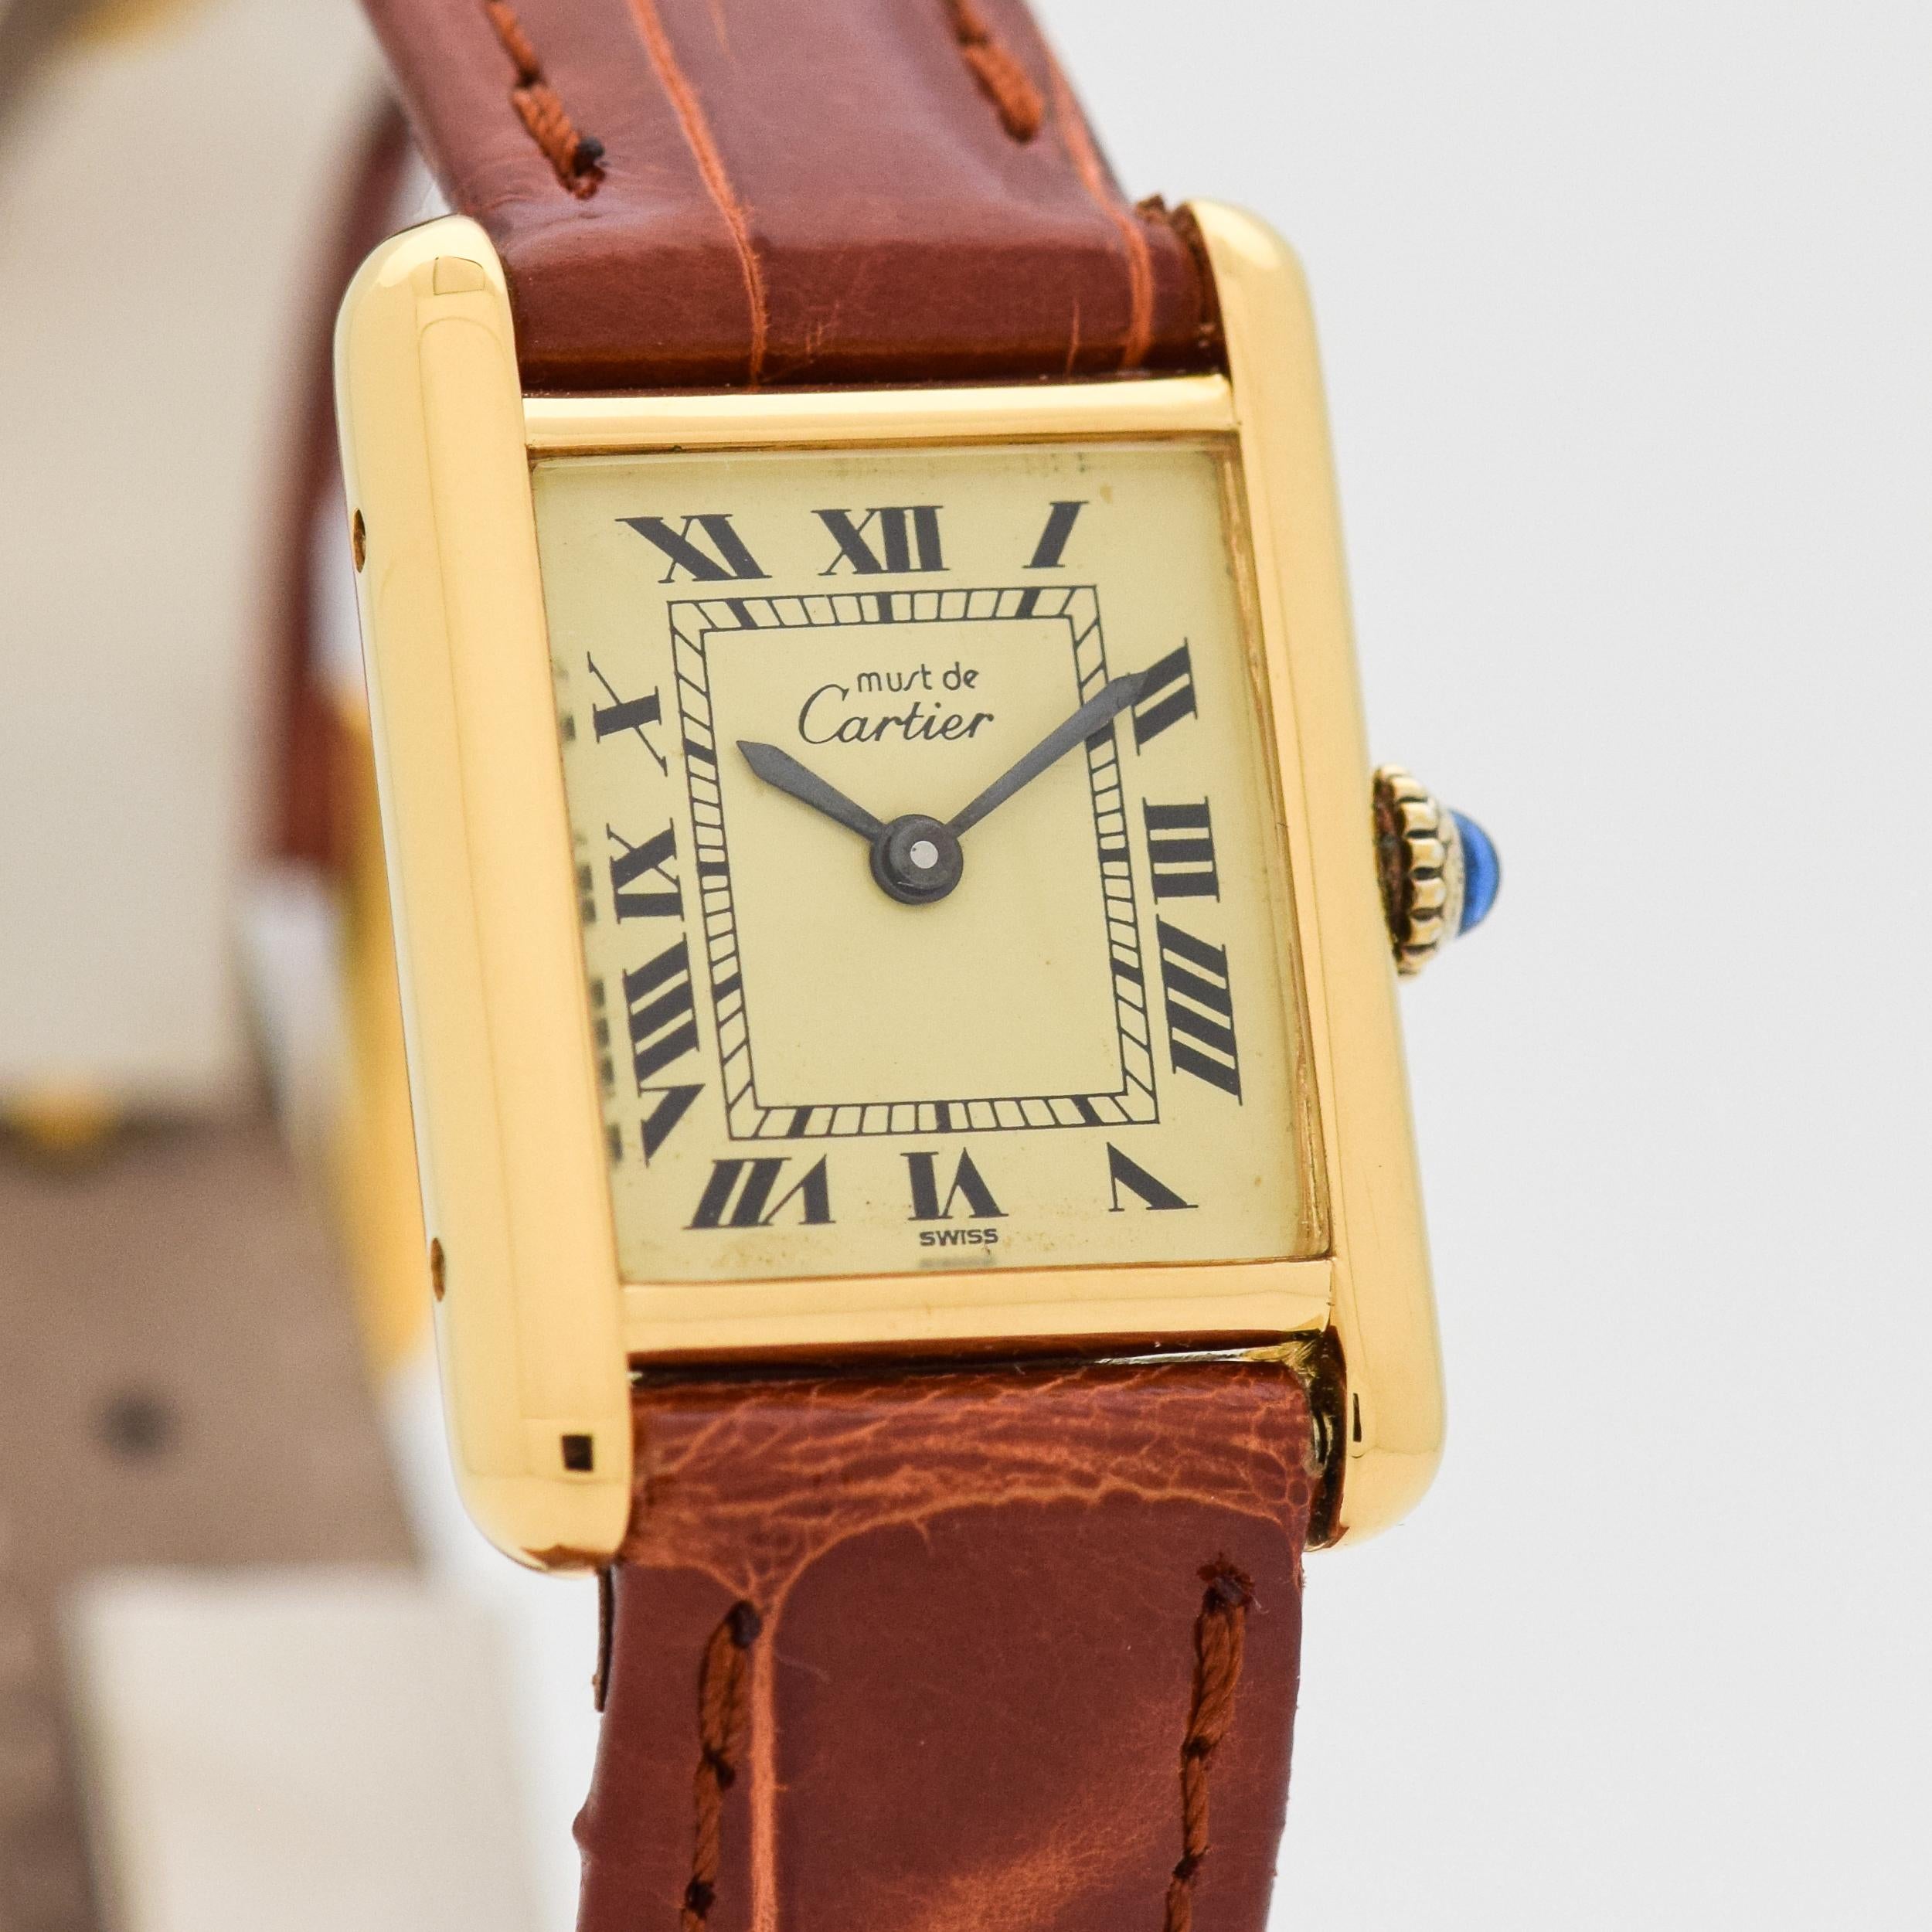 1980's Vintage Cartier Ladies Classic Size Must de Tank 18k Yellow Gold Plated Over Sterling Silver watch with Original Gold/Champagne Dial with Black Roman Numerals. 20mm x 27mm lug to lug (0.79 in. x 1.06 in.) - 17 jewel, manual caliber ETA